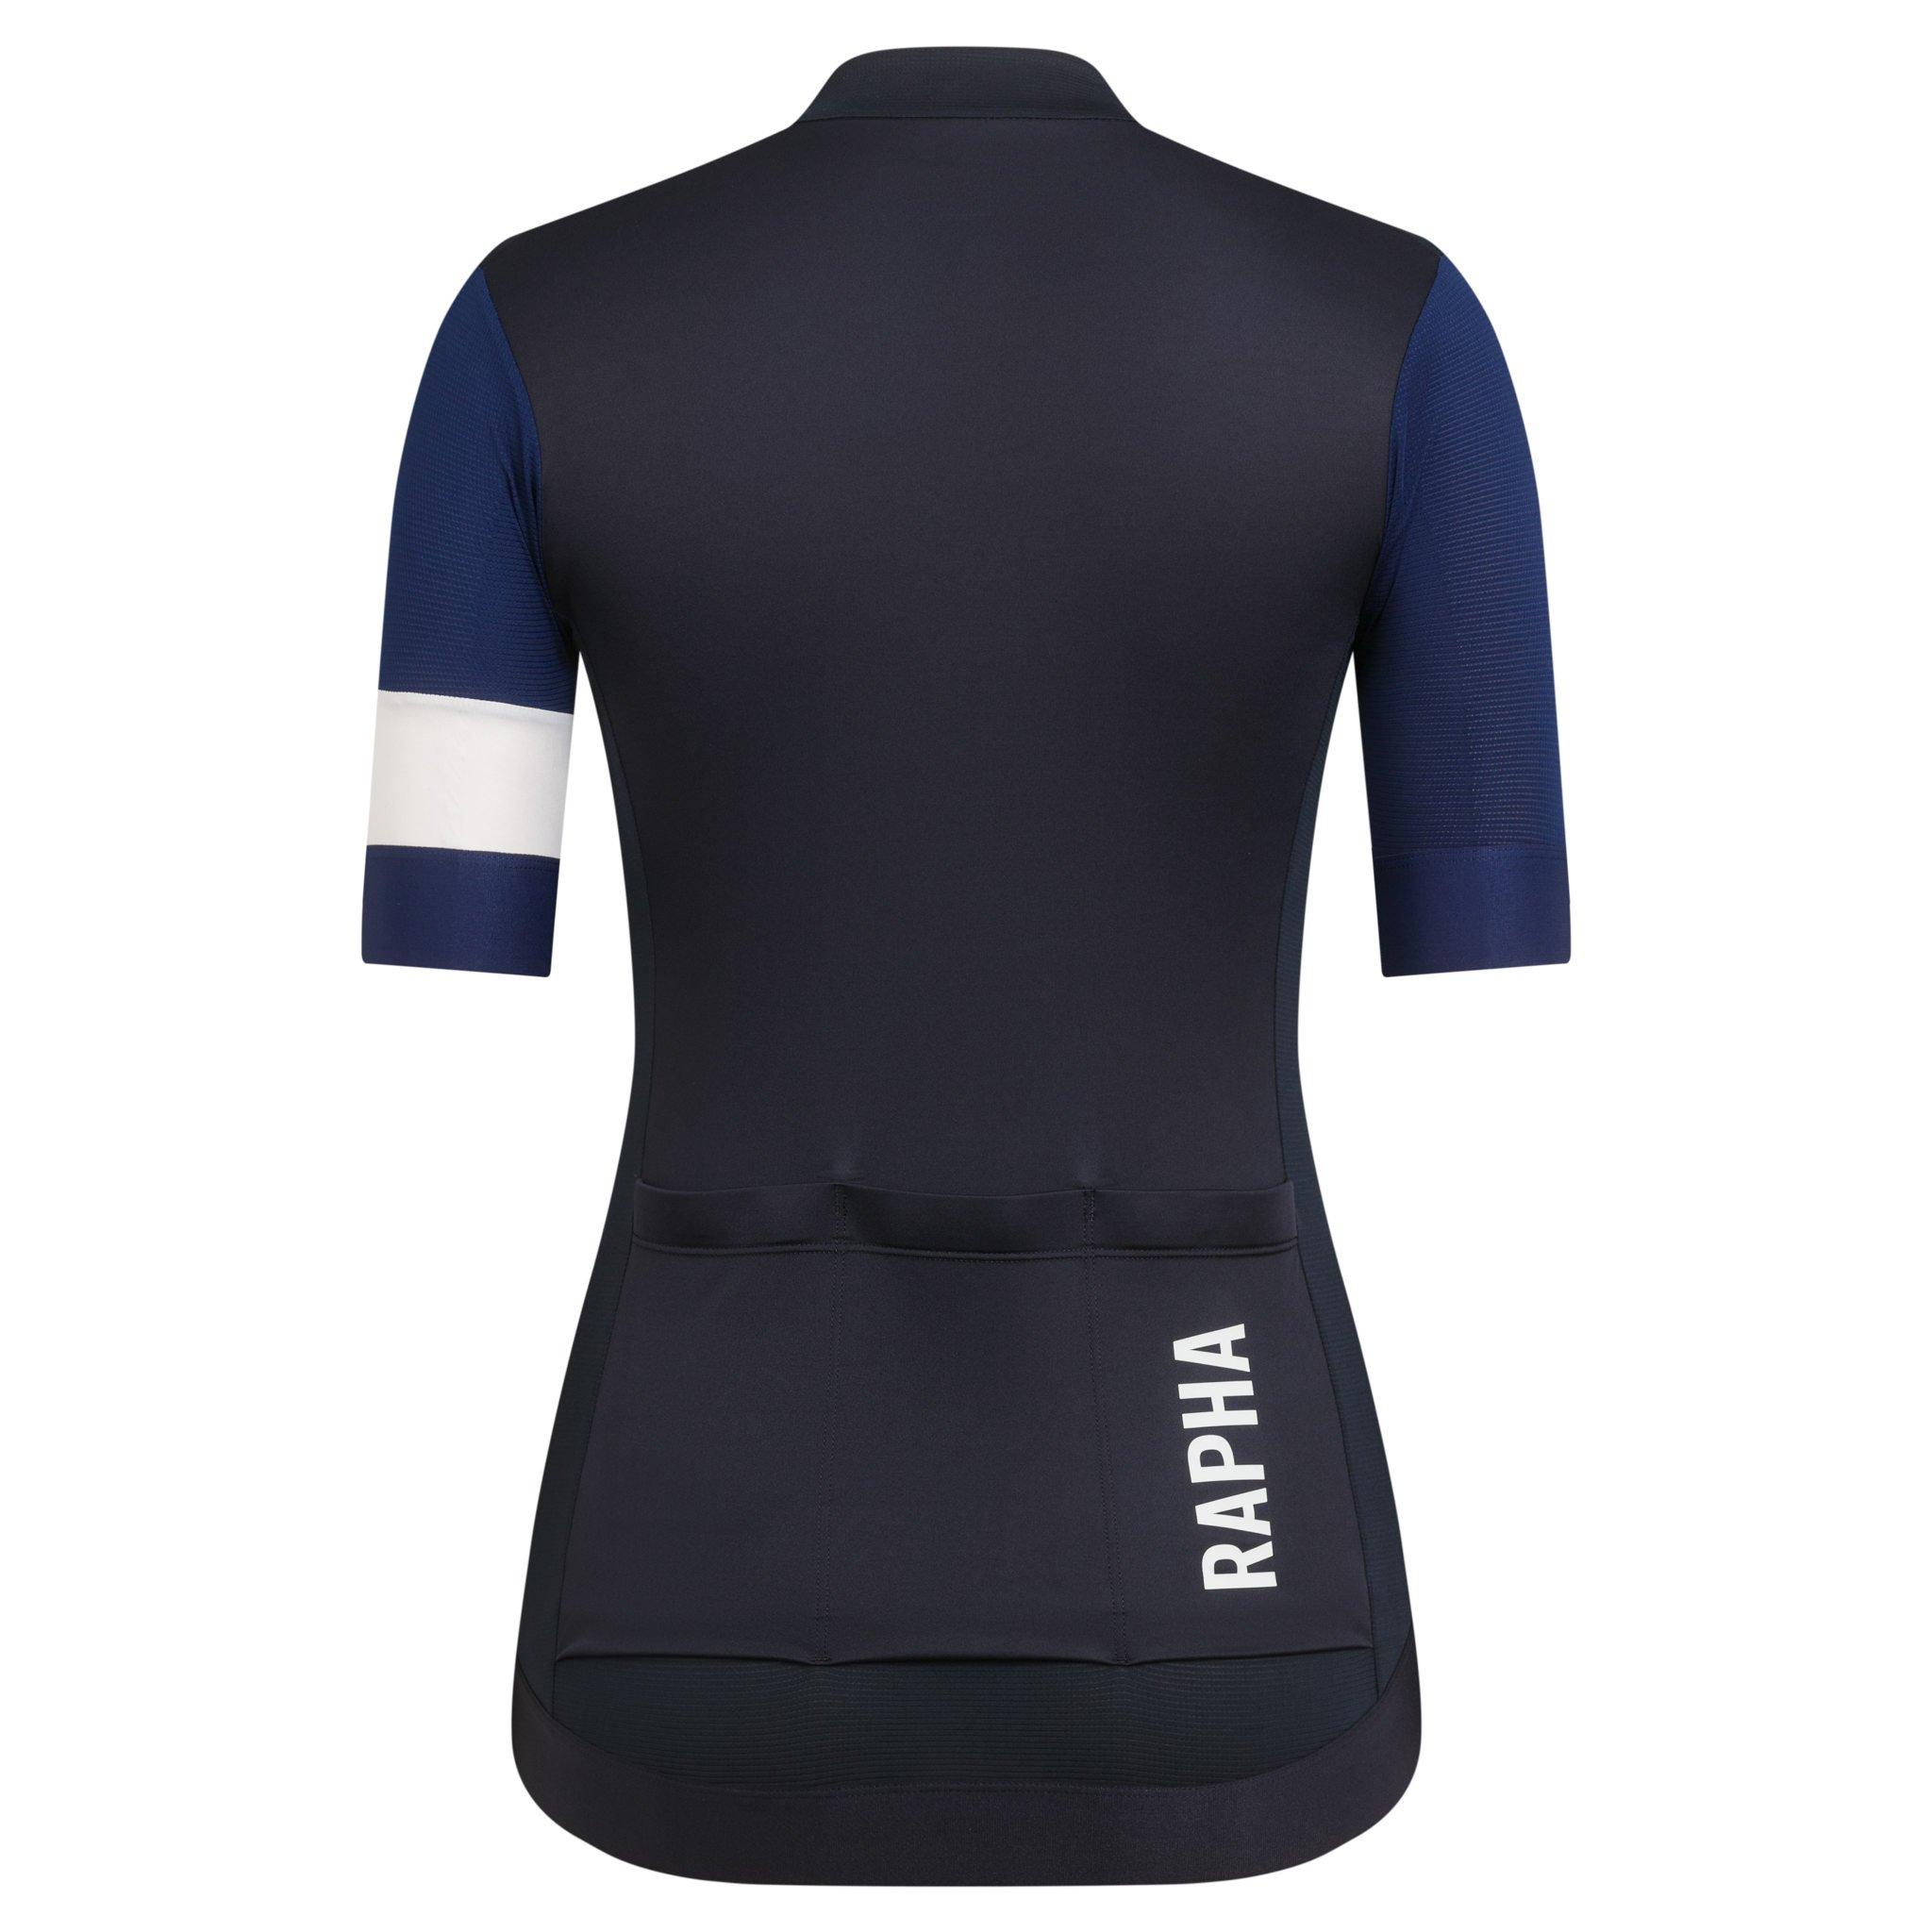 Women's Pro Team Training Jersey for Cycling | Rapha